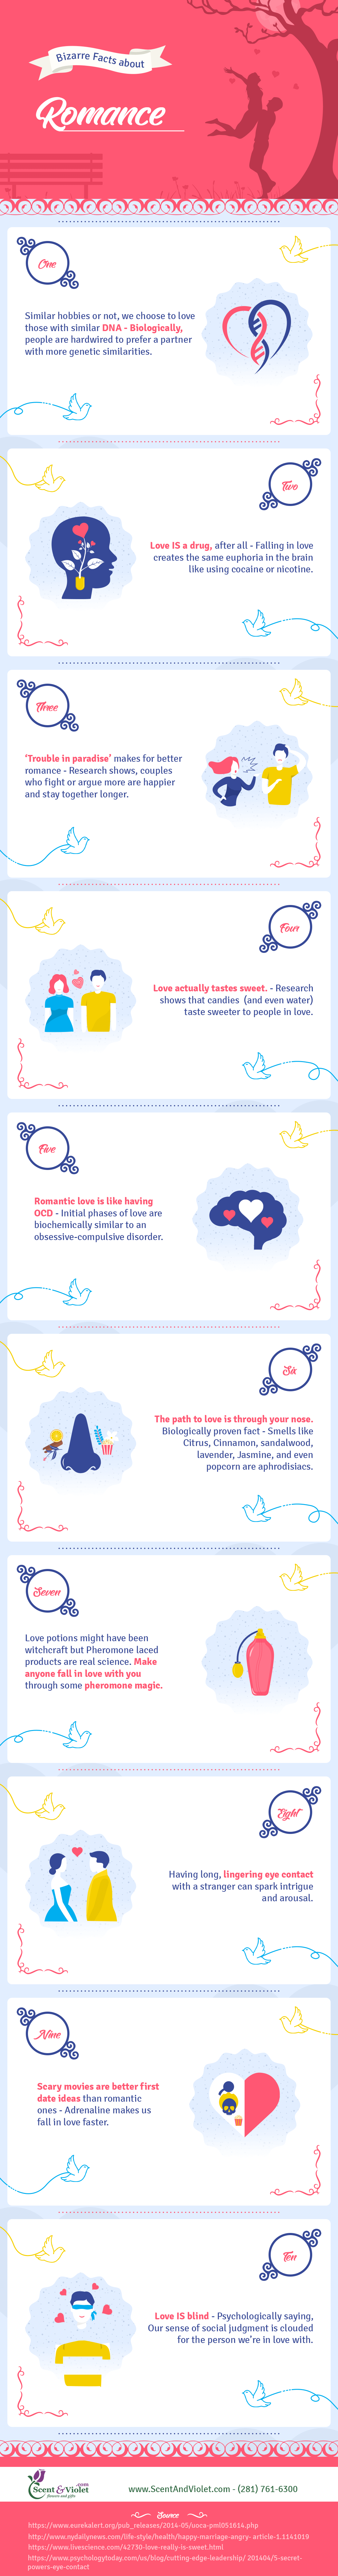 Bizarre facts about romance infographic